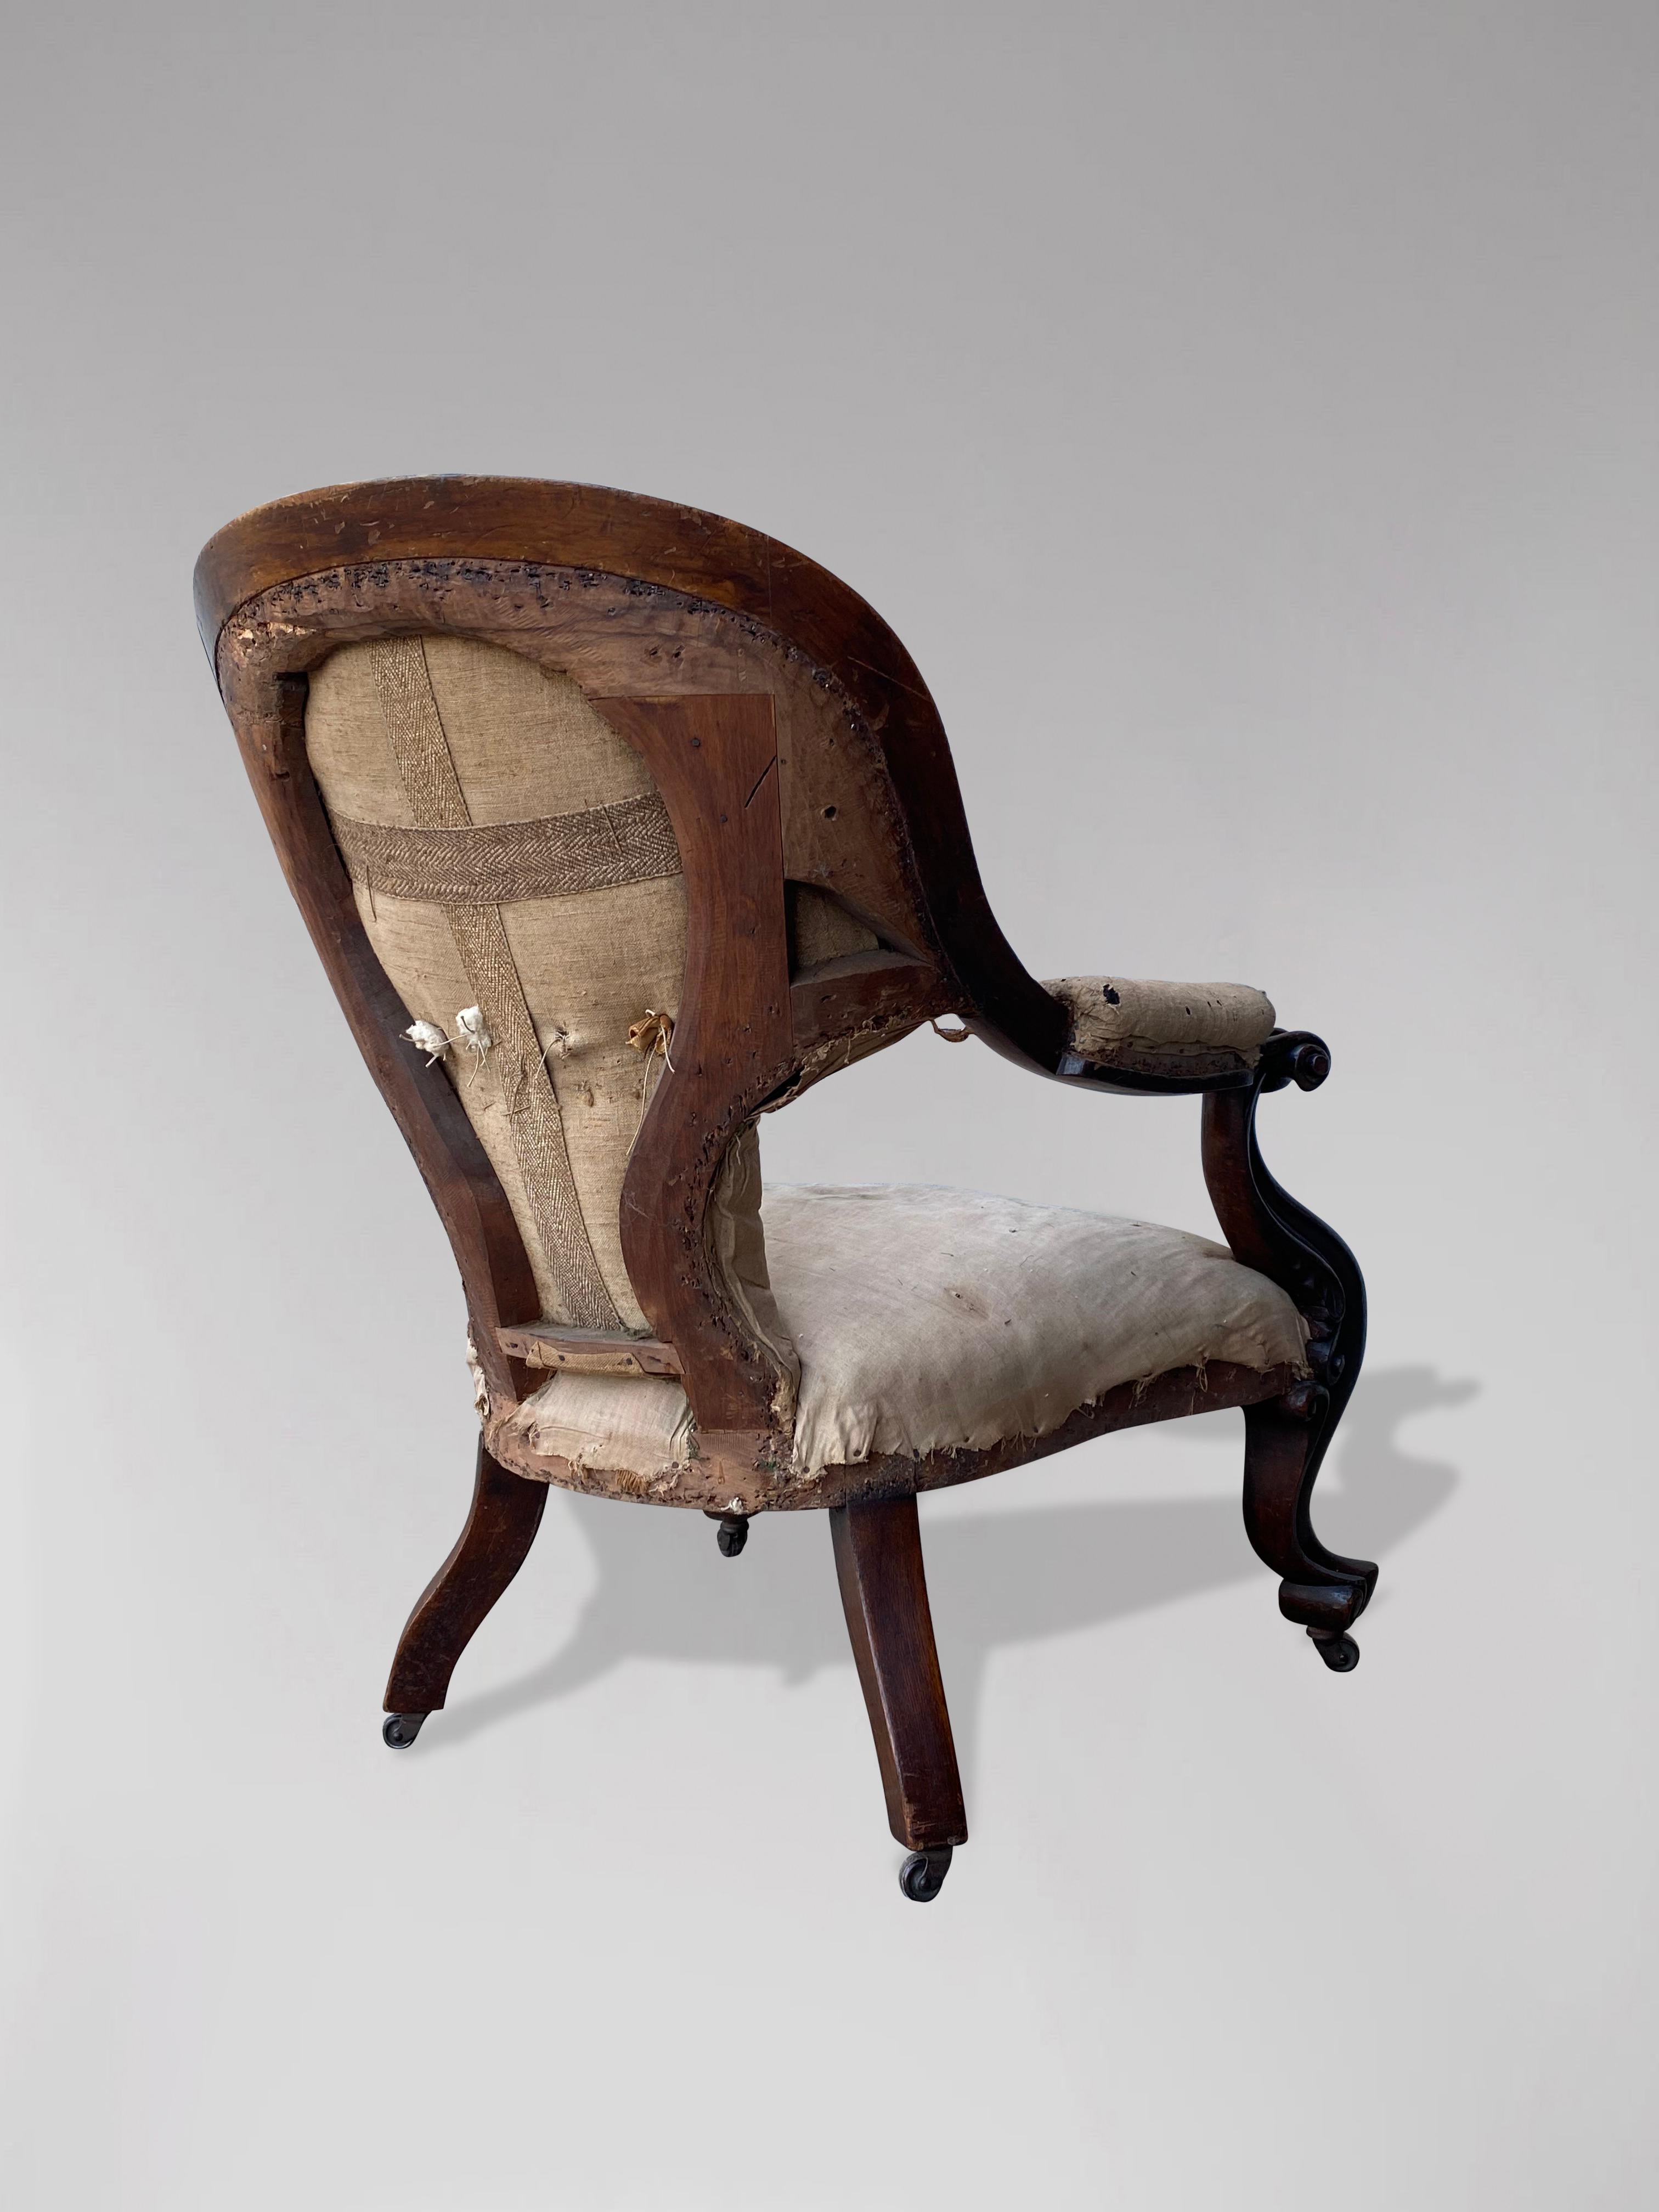 Hand-Carved Mid 19th Century Victorian Period Mahogany Open Armchair